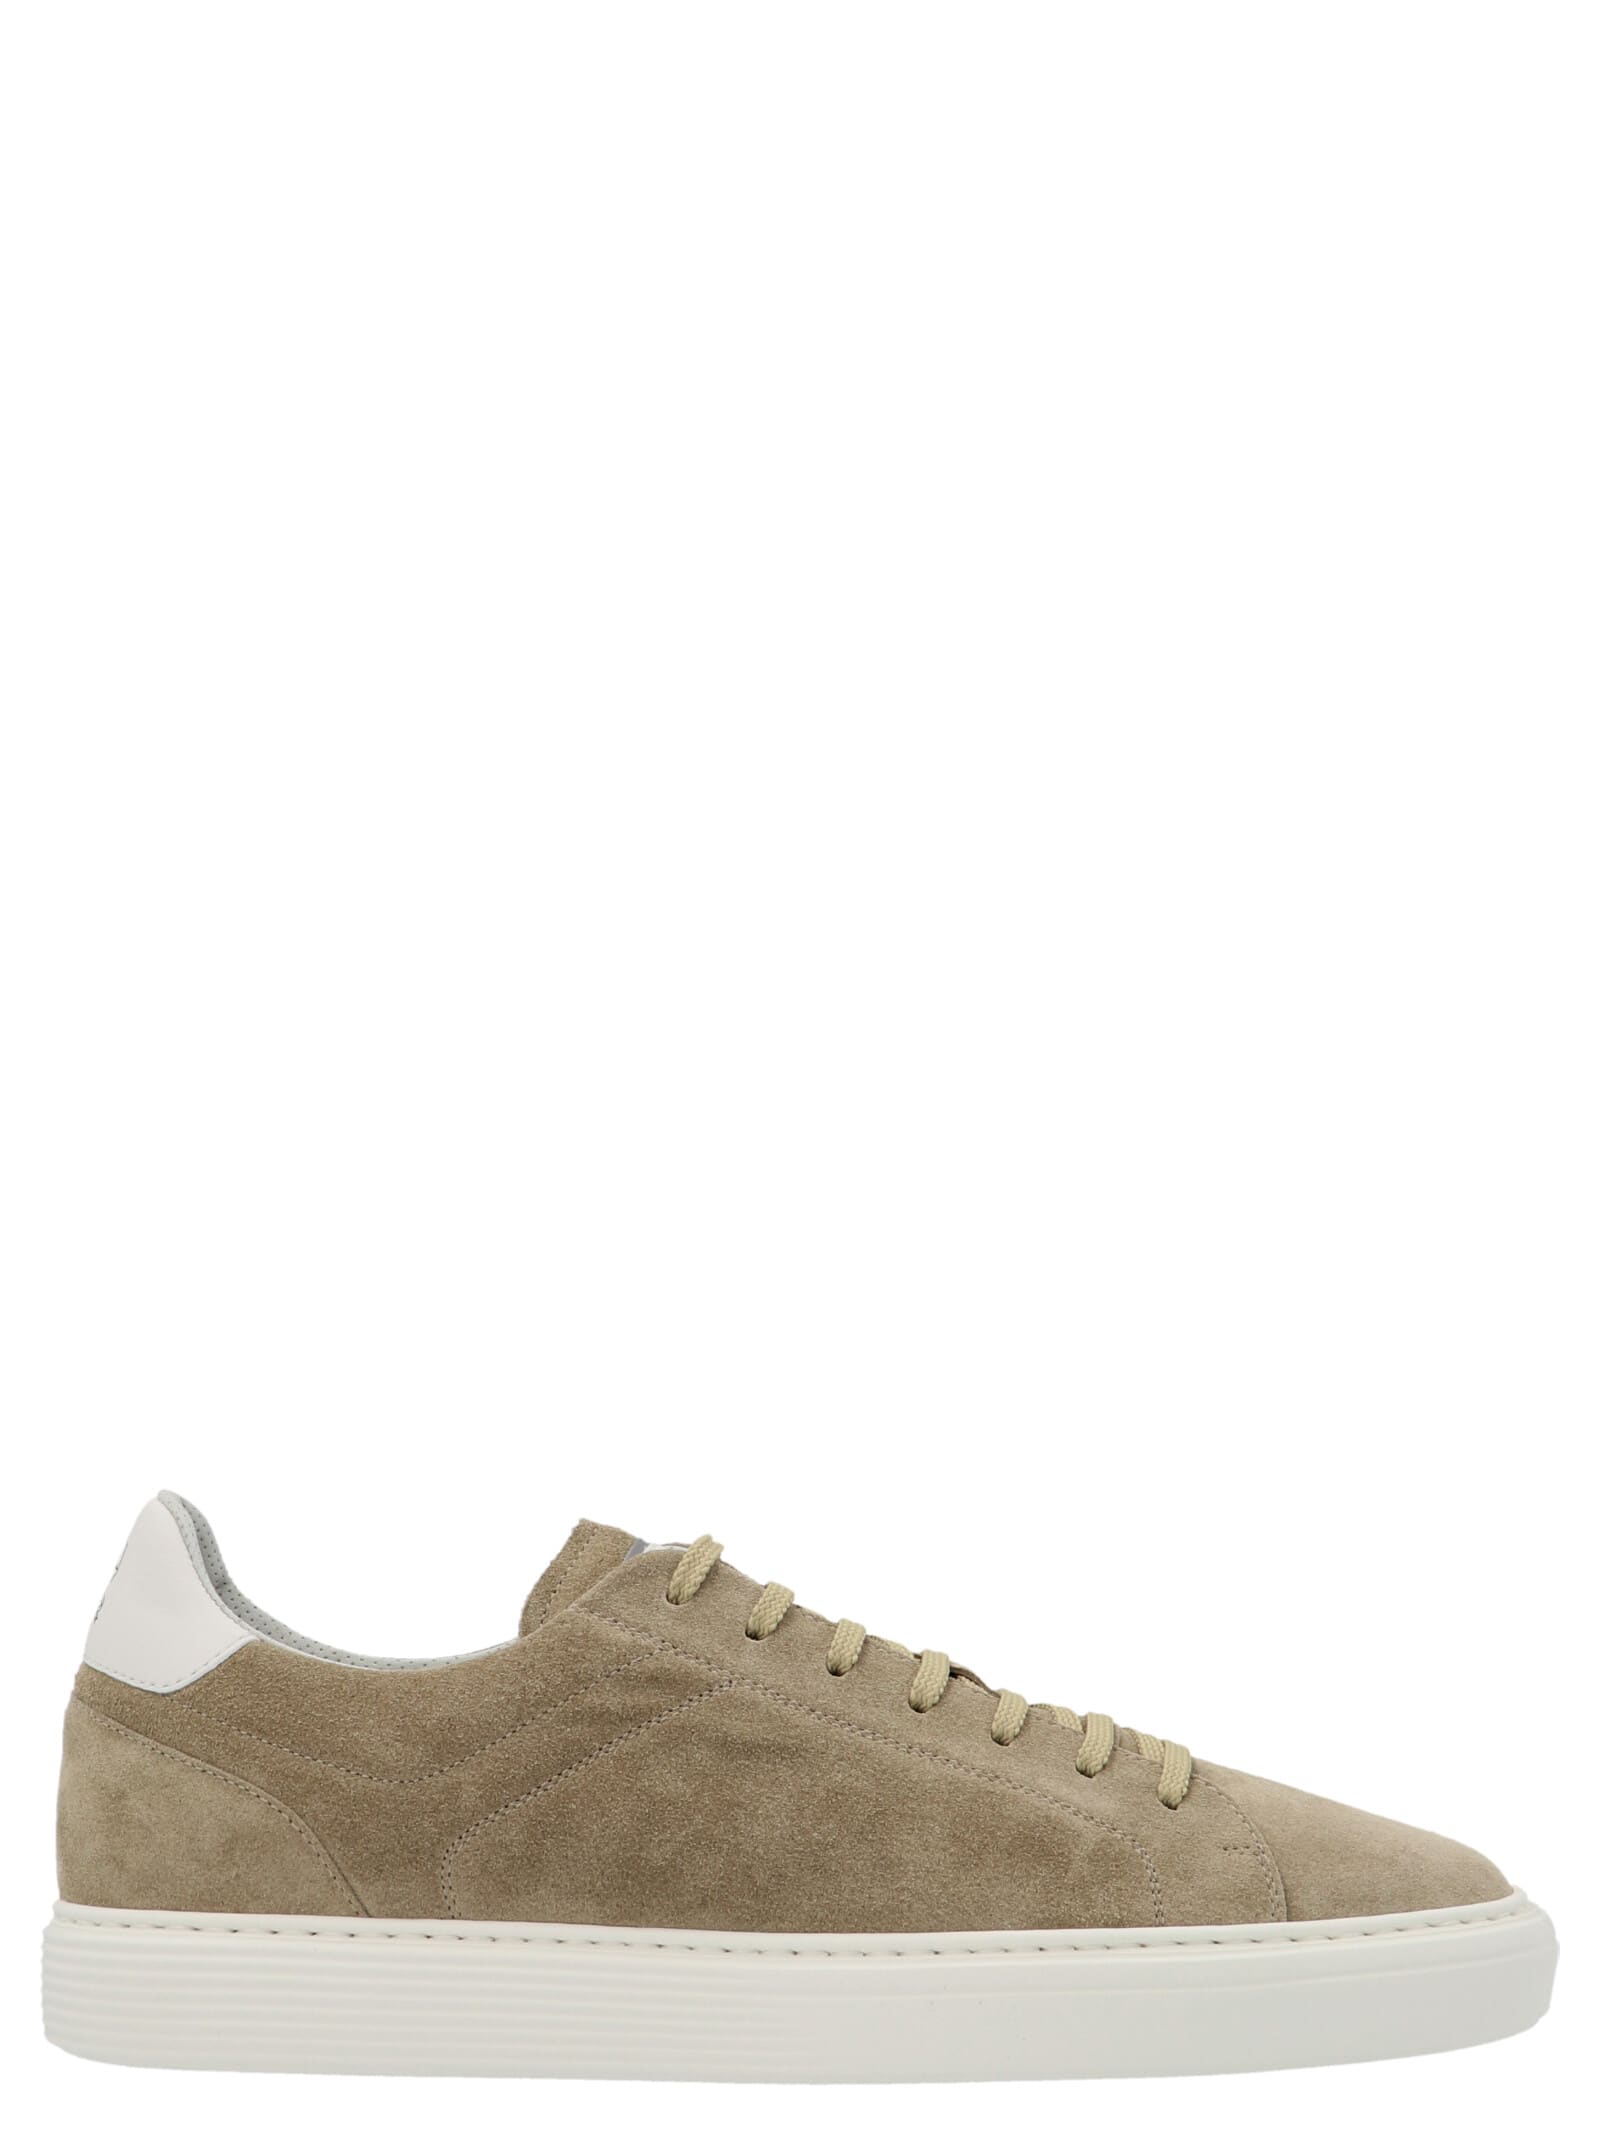 Brunello Cucinelli Low Leather Sneakers